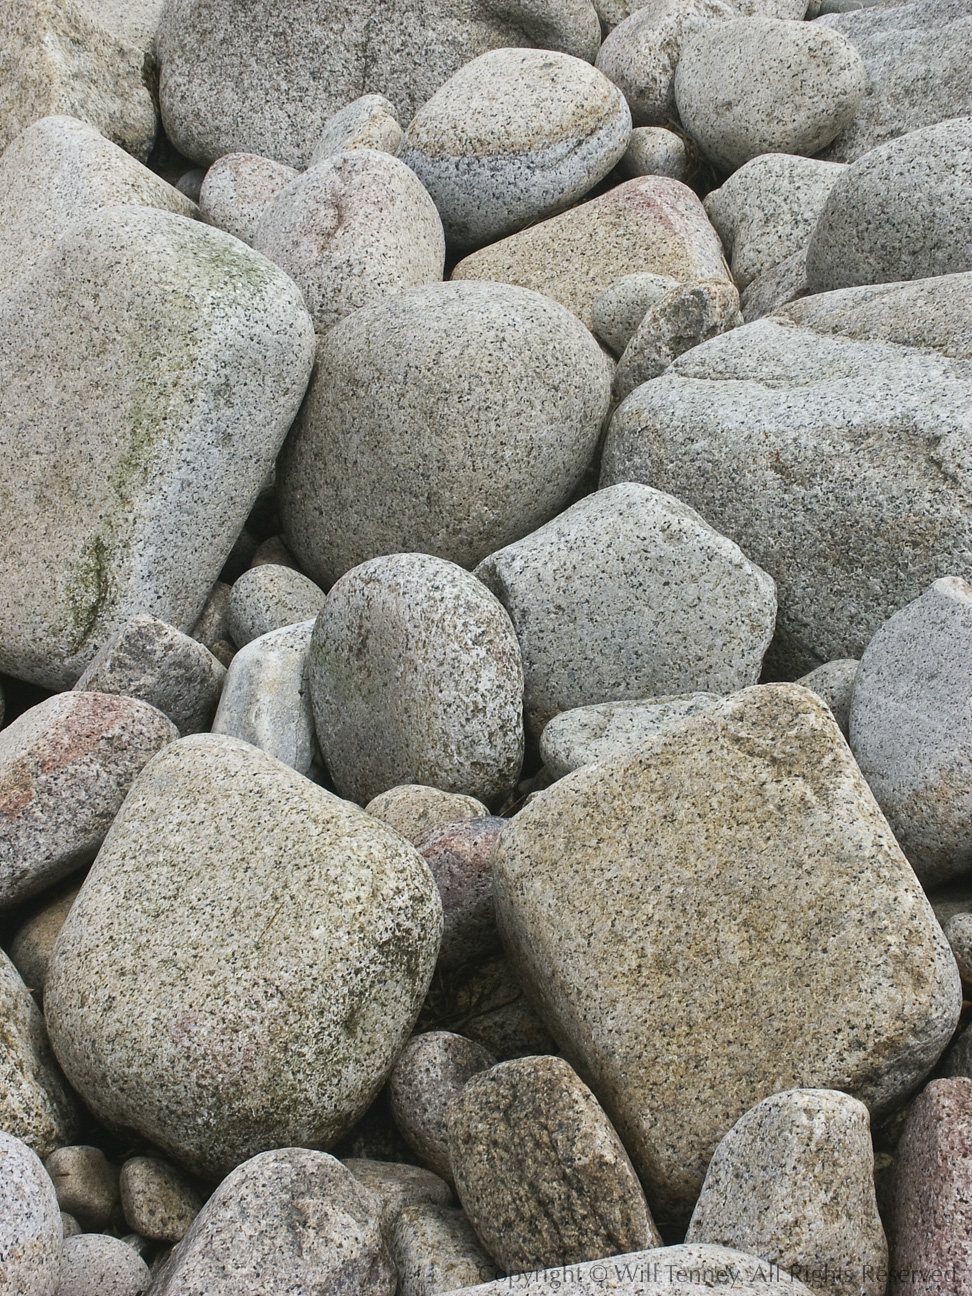 Rockport Cobbles: Photograph by Will Tenney